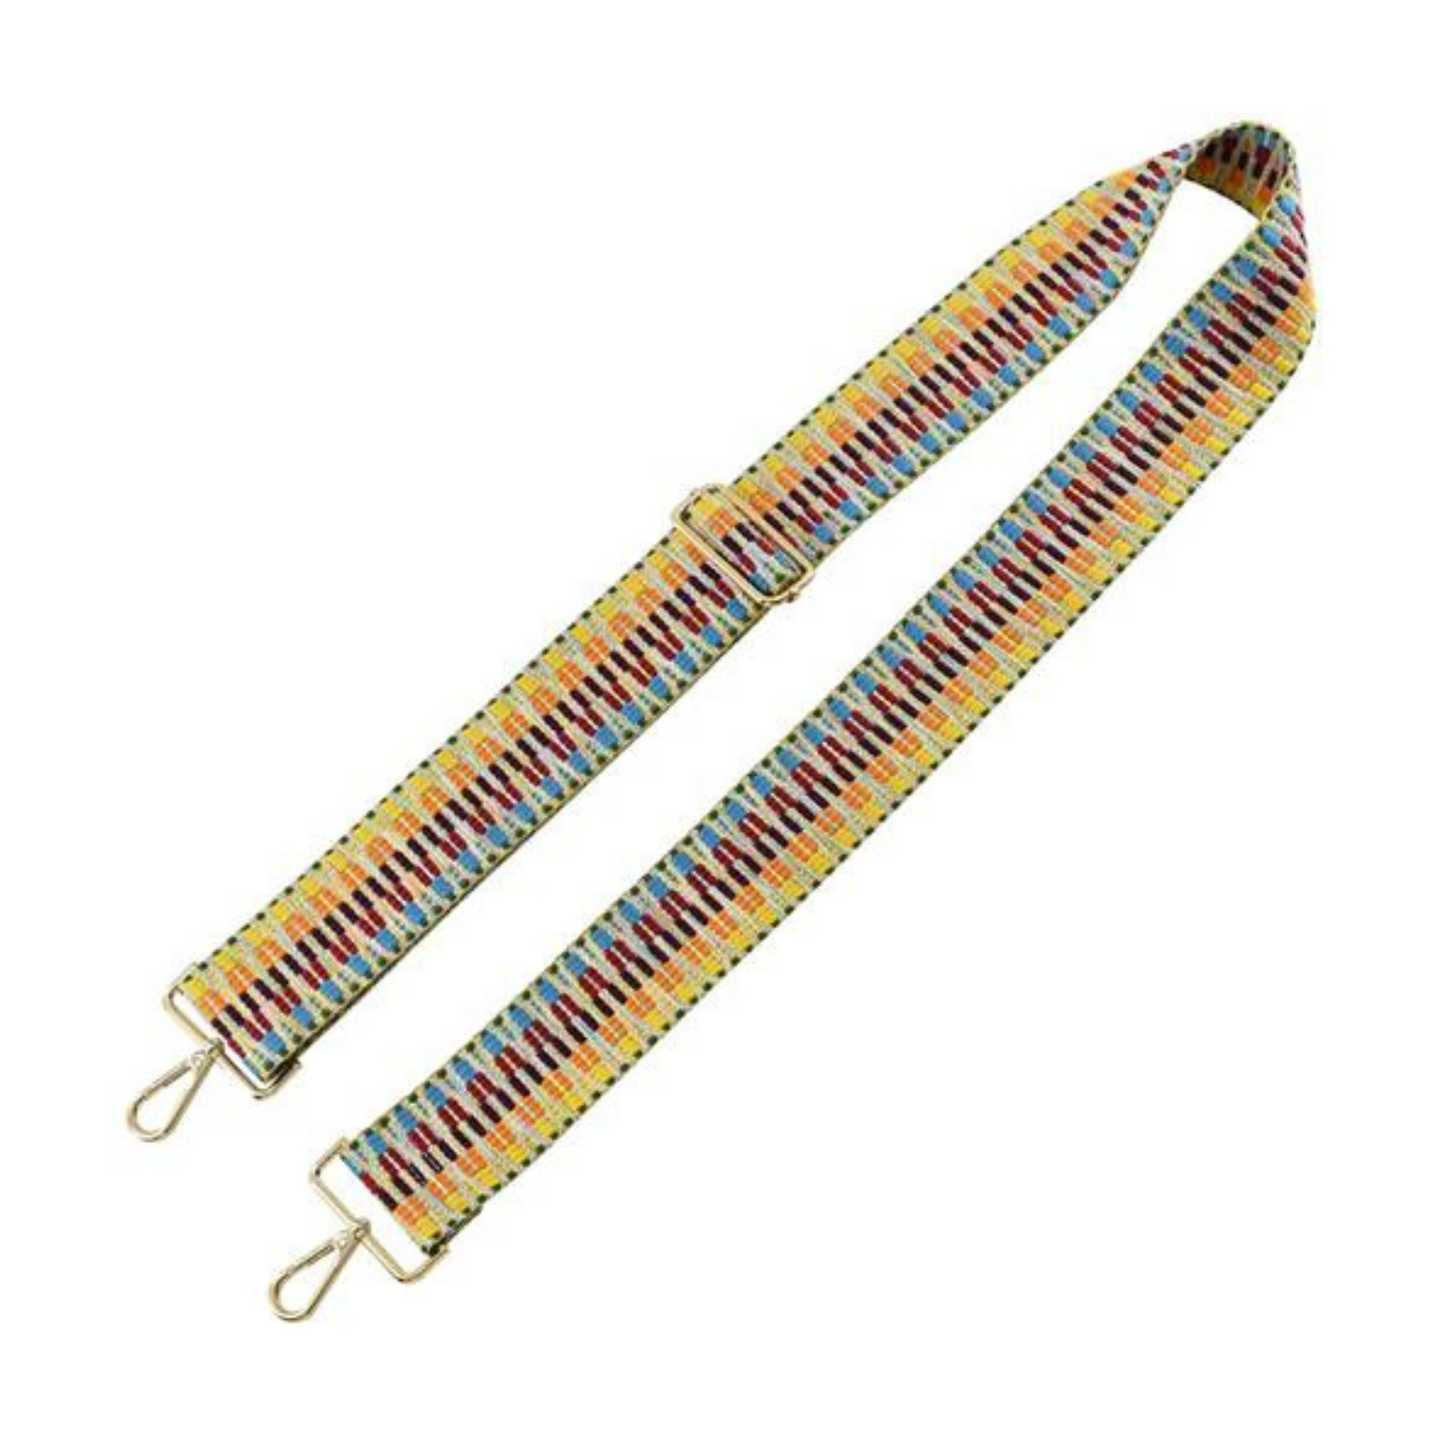 This Embroidered Boho Purse Strap is the perfect accessory to brighten up your look. With a multicolor variety of embroidered styles, it is sure to liven up any outfit. The adjustable strap allows for a comfortable and secure fit. Add a fashionable twist to any purse with this stylish accessory.